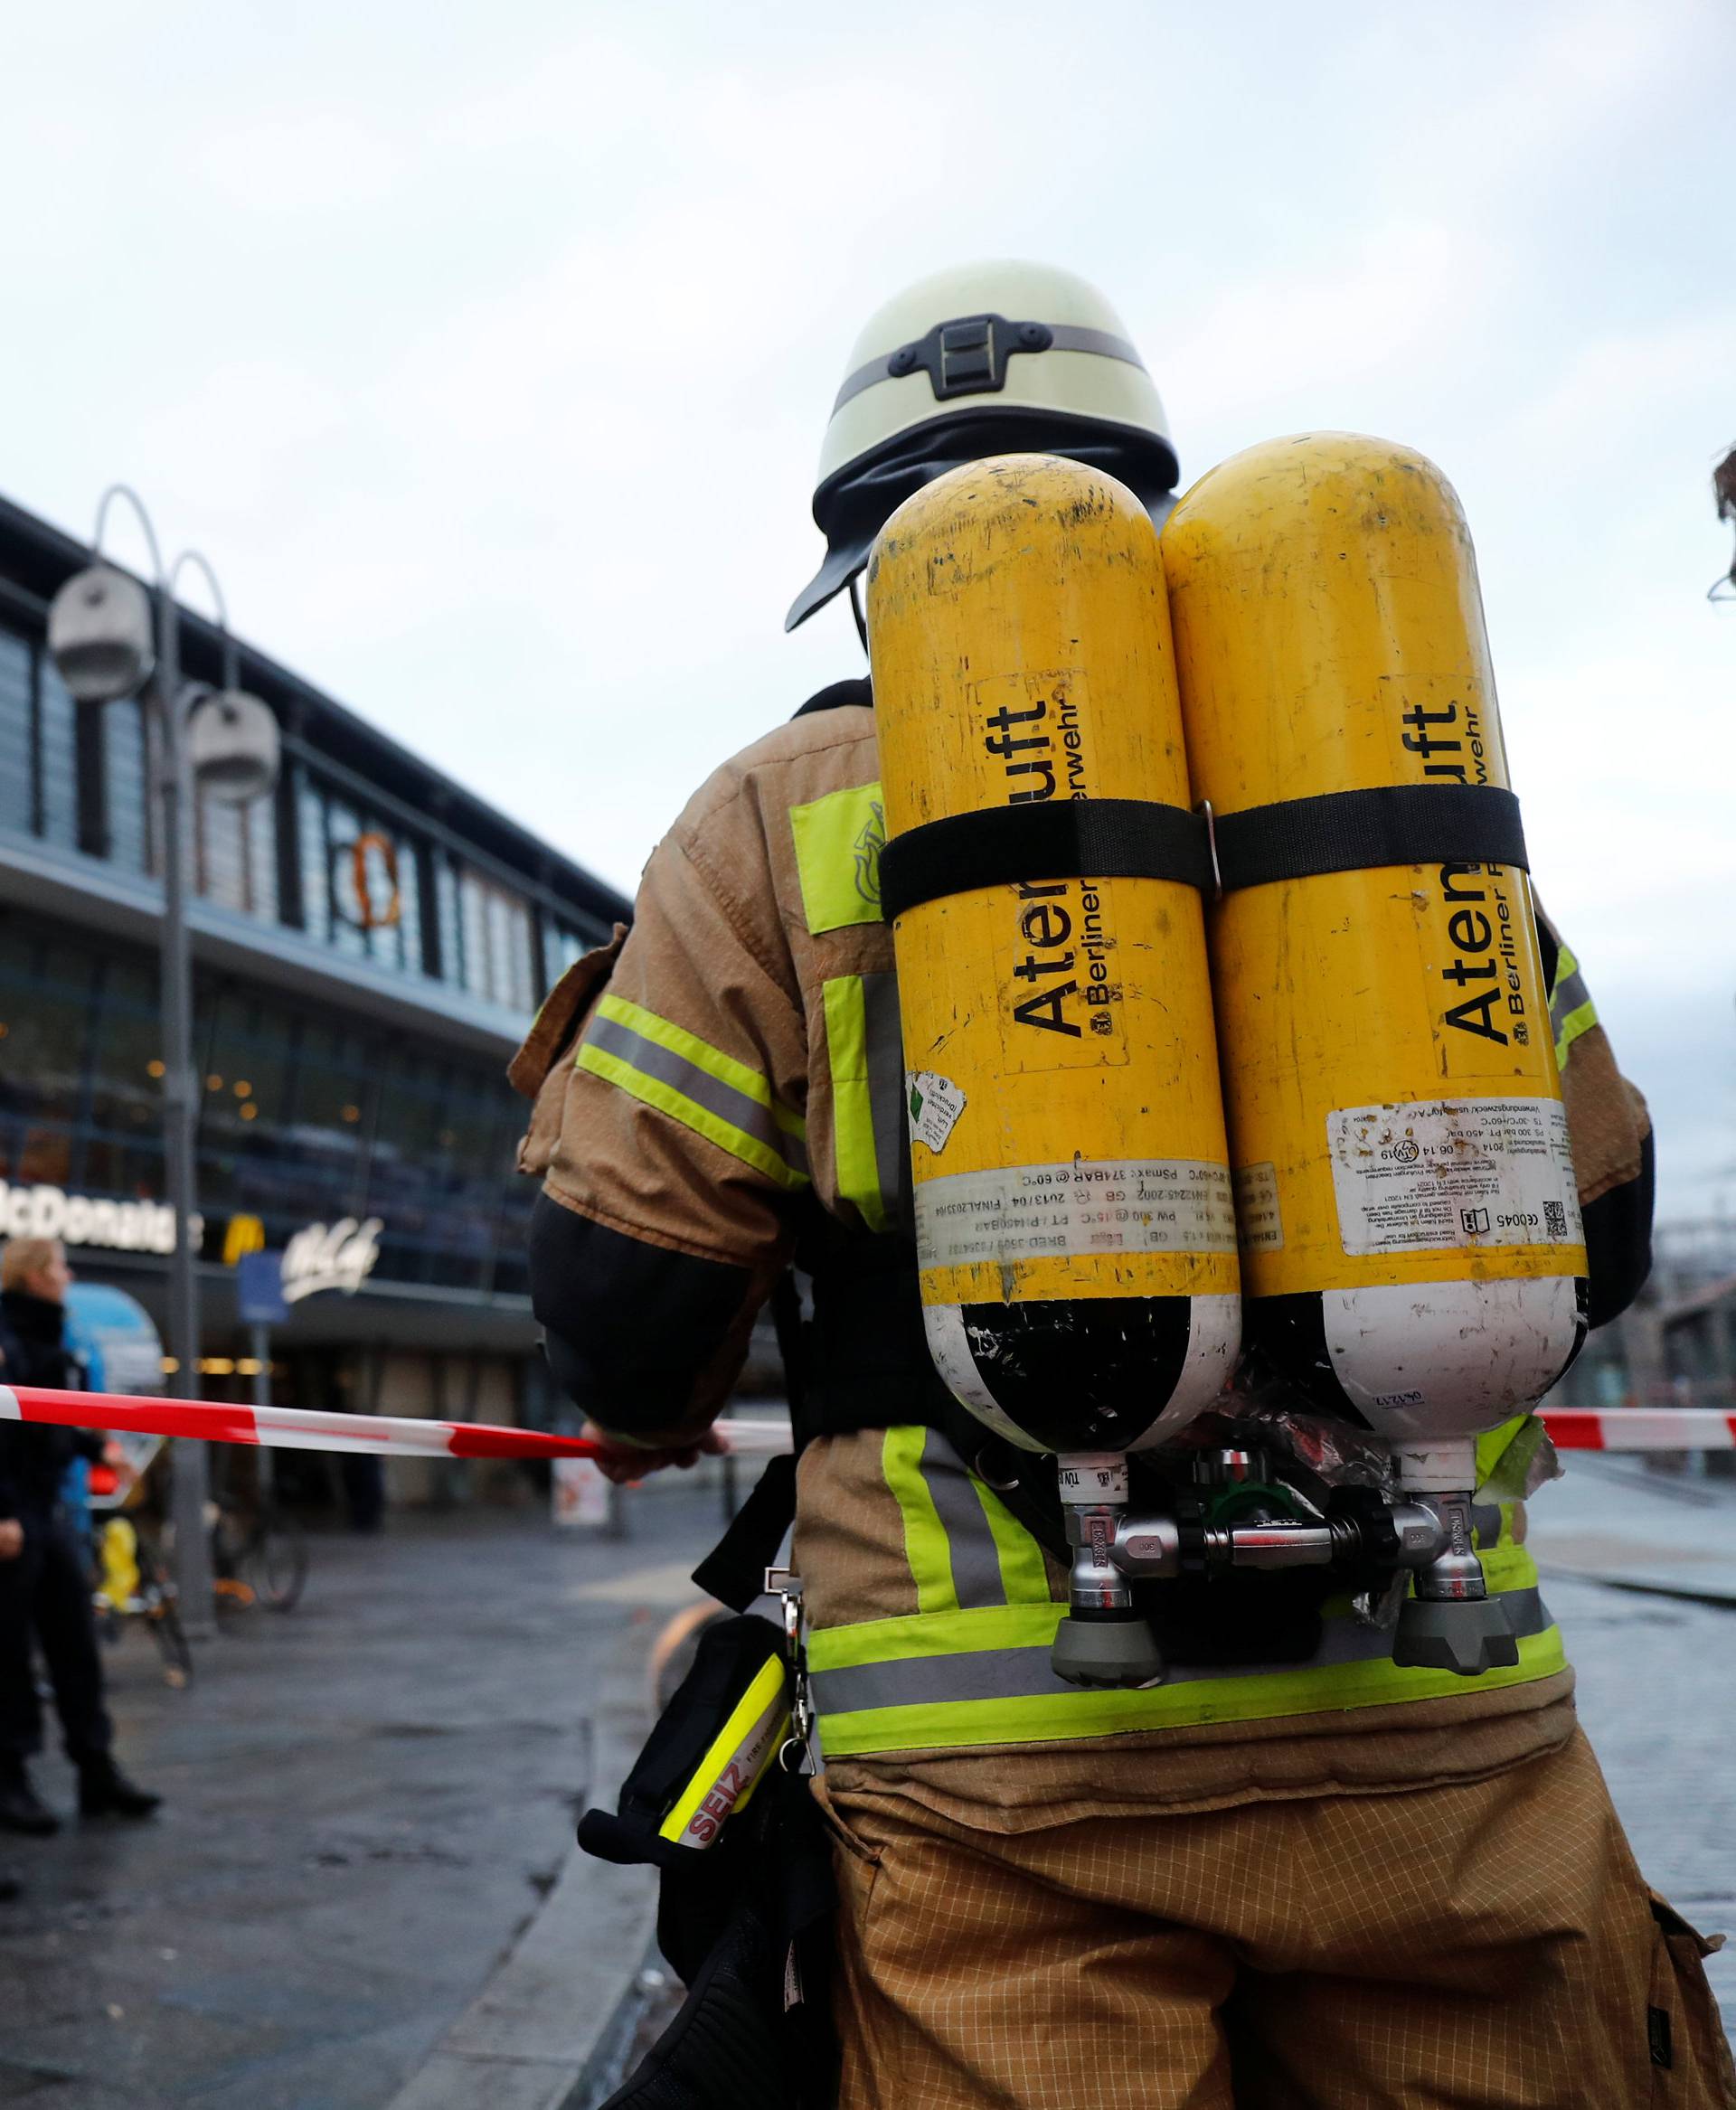 A firefighter stands outside the Berlin's Zoo train station after a large amount of smoke was detected and several people were rescued from the scene in Berlin